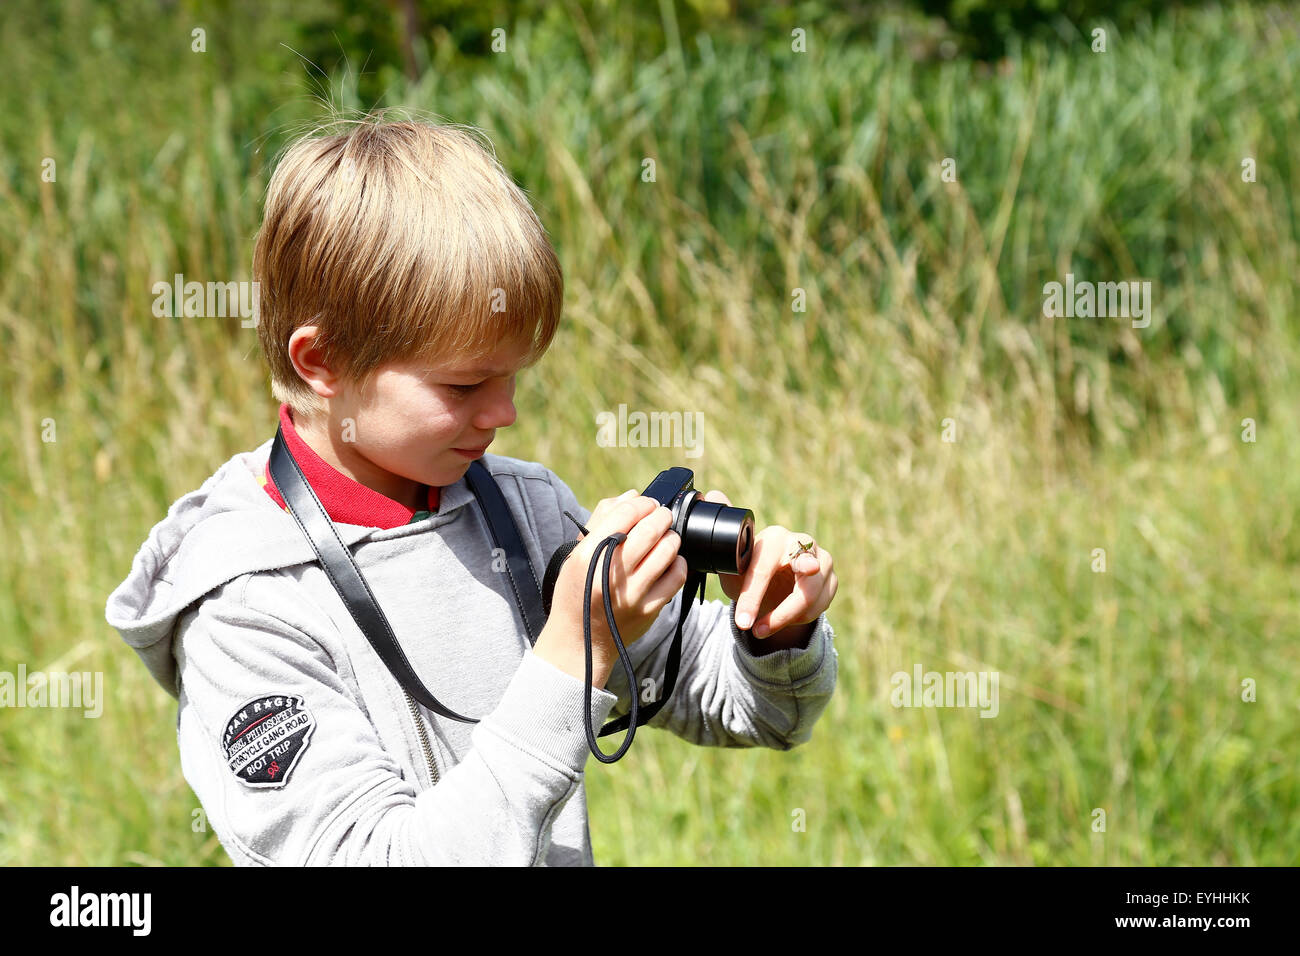 Young boy takes a picture of a grasshopper on his finger Stock Photo